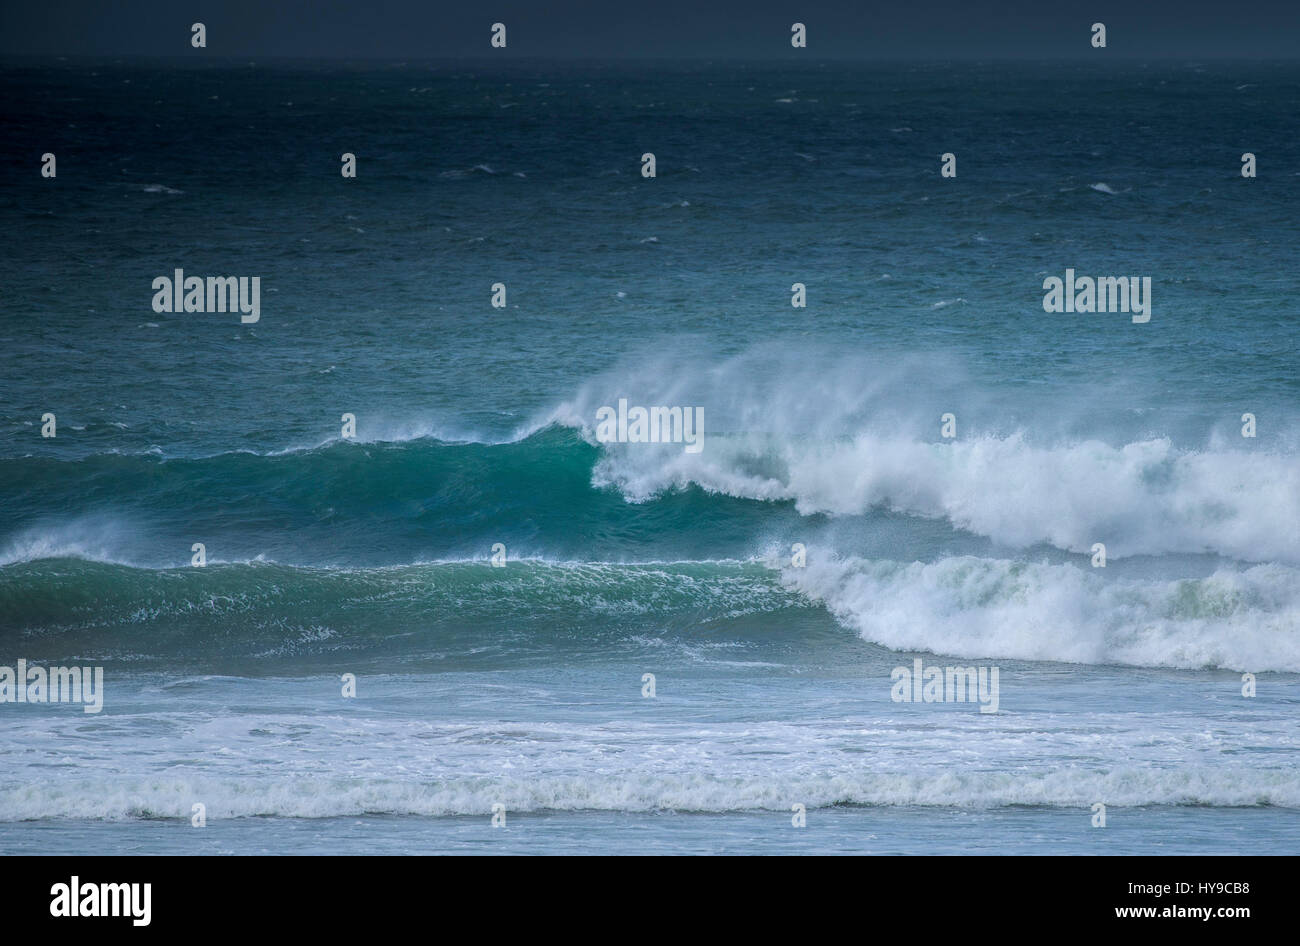 Fistral UK weather Waves Sea Spray Wind Windy Surf Nature Wild Seaside Power Atmospheric Cornwall Stock Photo